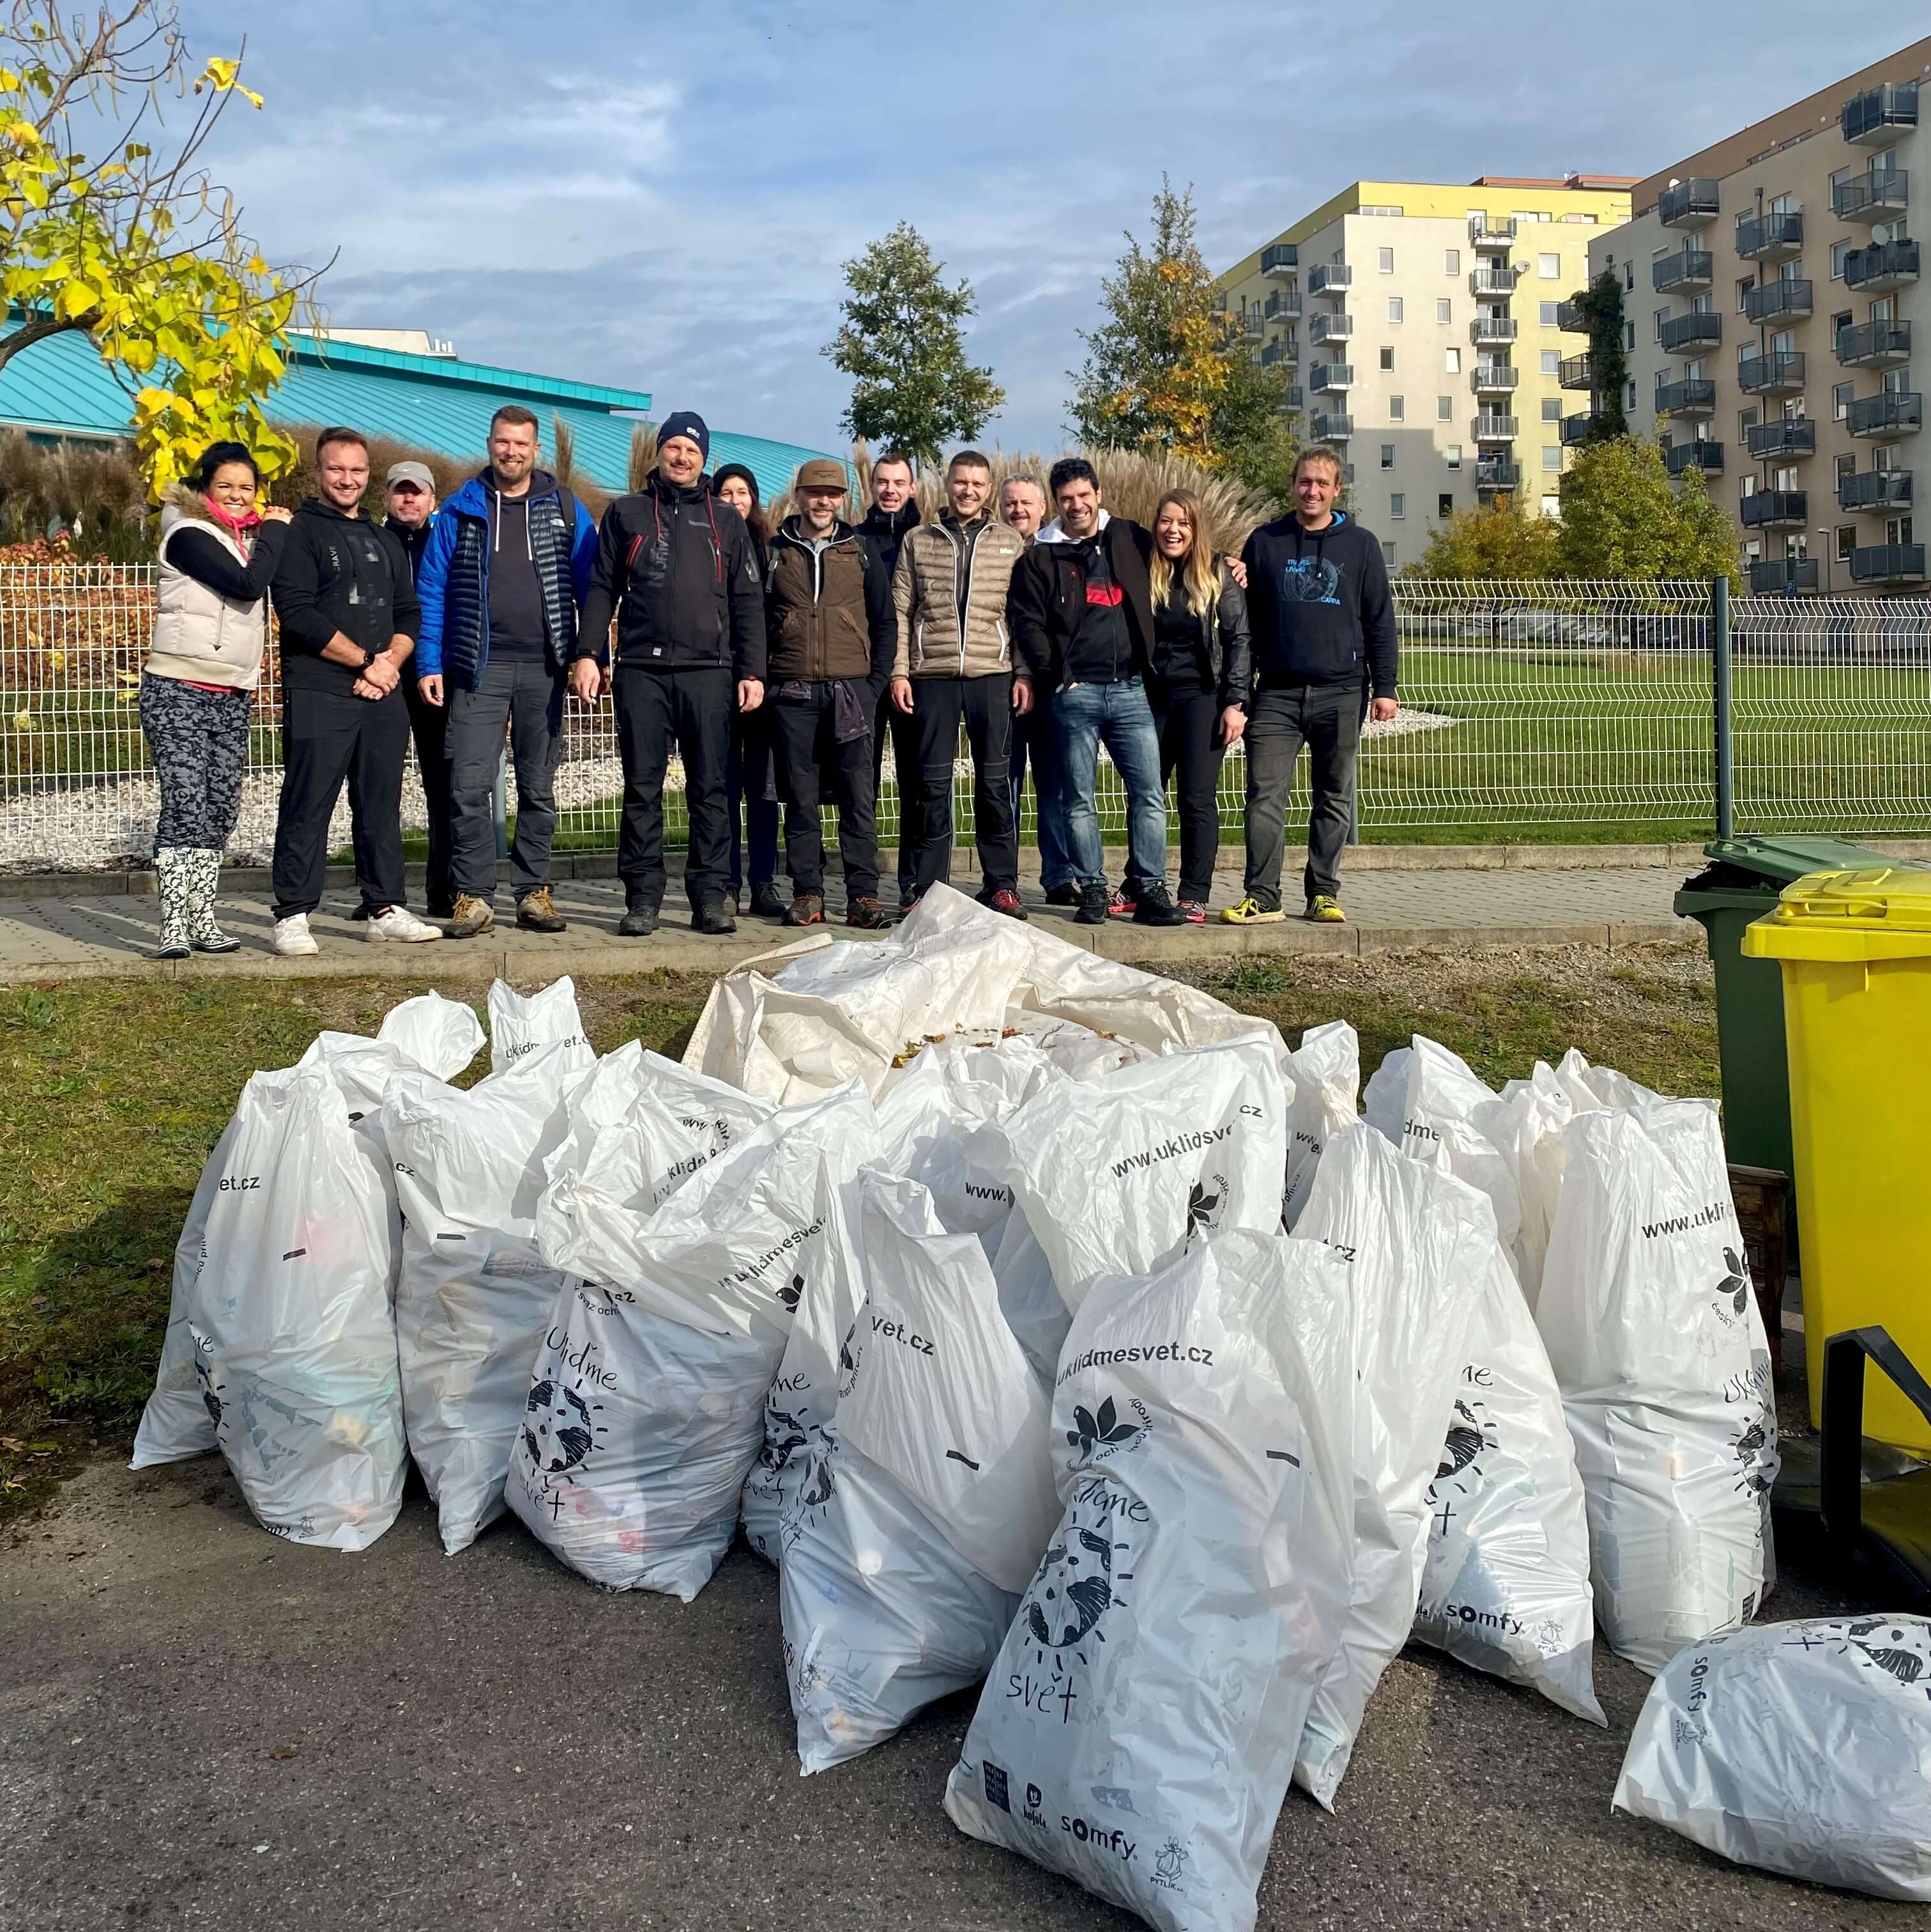 <p><strong>CLEANUP DAY</strong><br />
Prague, Czech Republic – On October 21, fourteen Eastern Europe BU employees participated in cleaning up a park near the office called Central Park. A great team effort resulted in the collection of about 30 garbage bags. </p>
